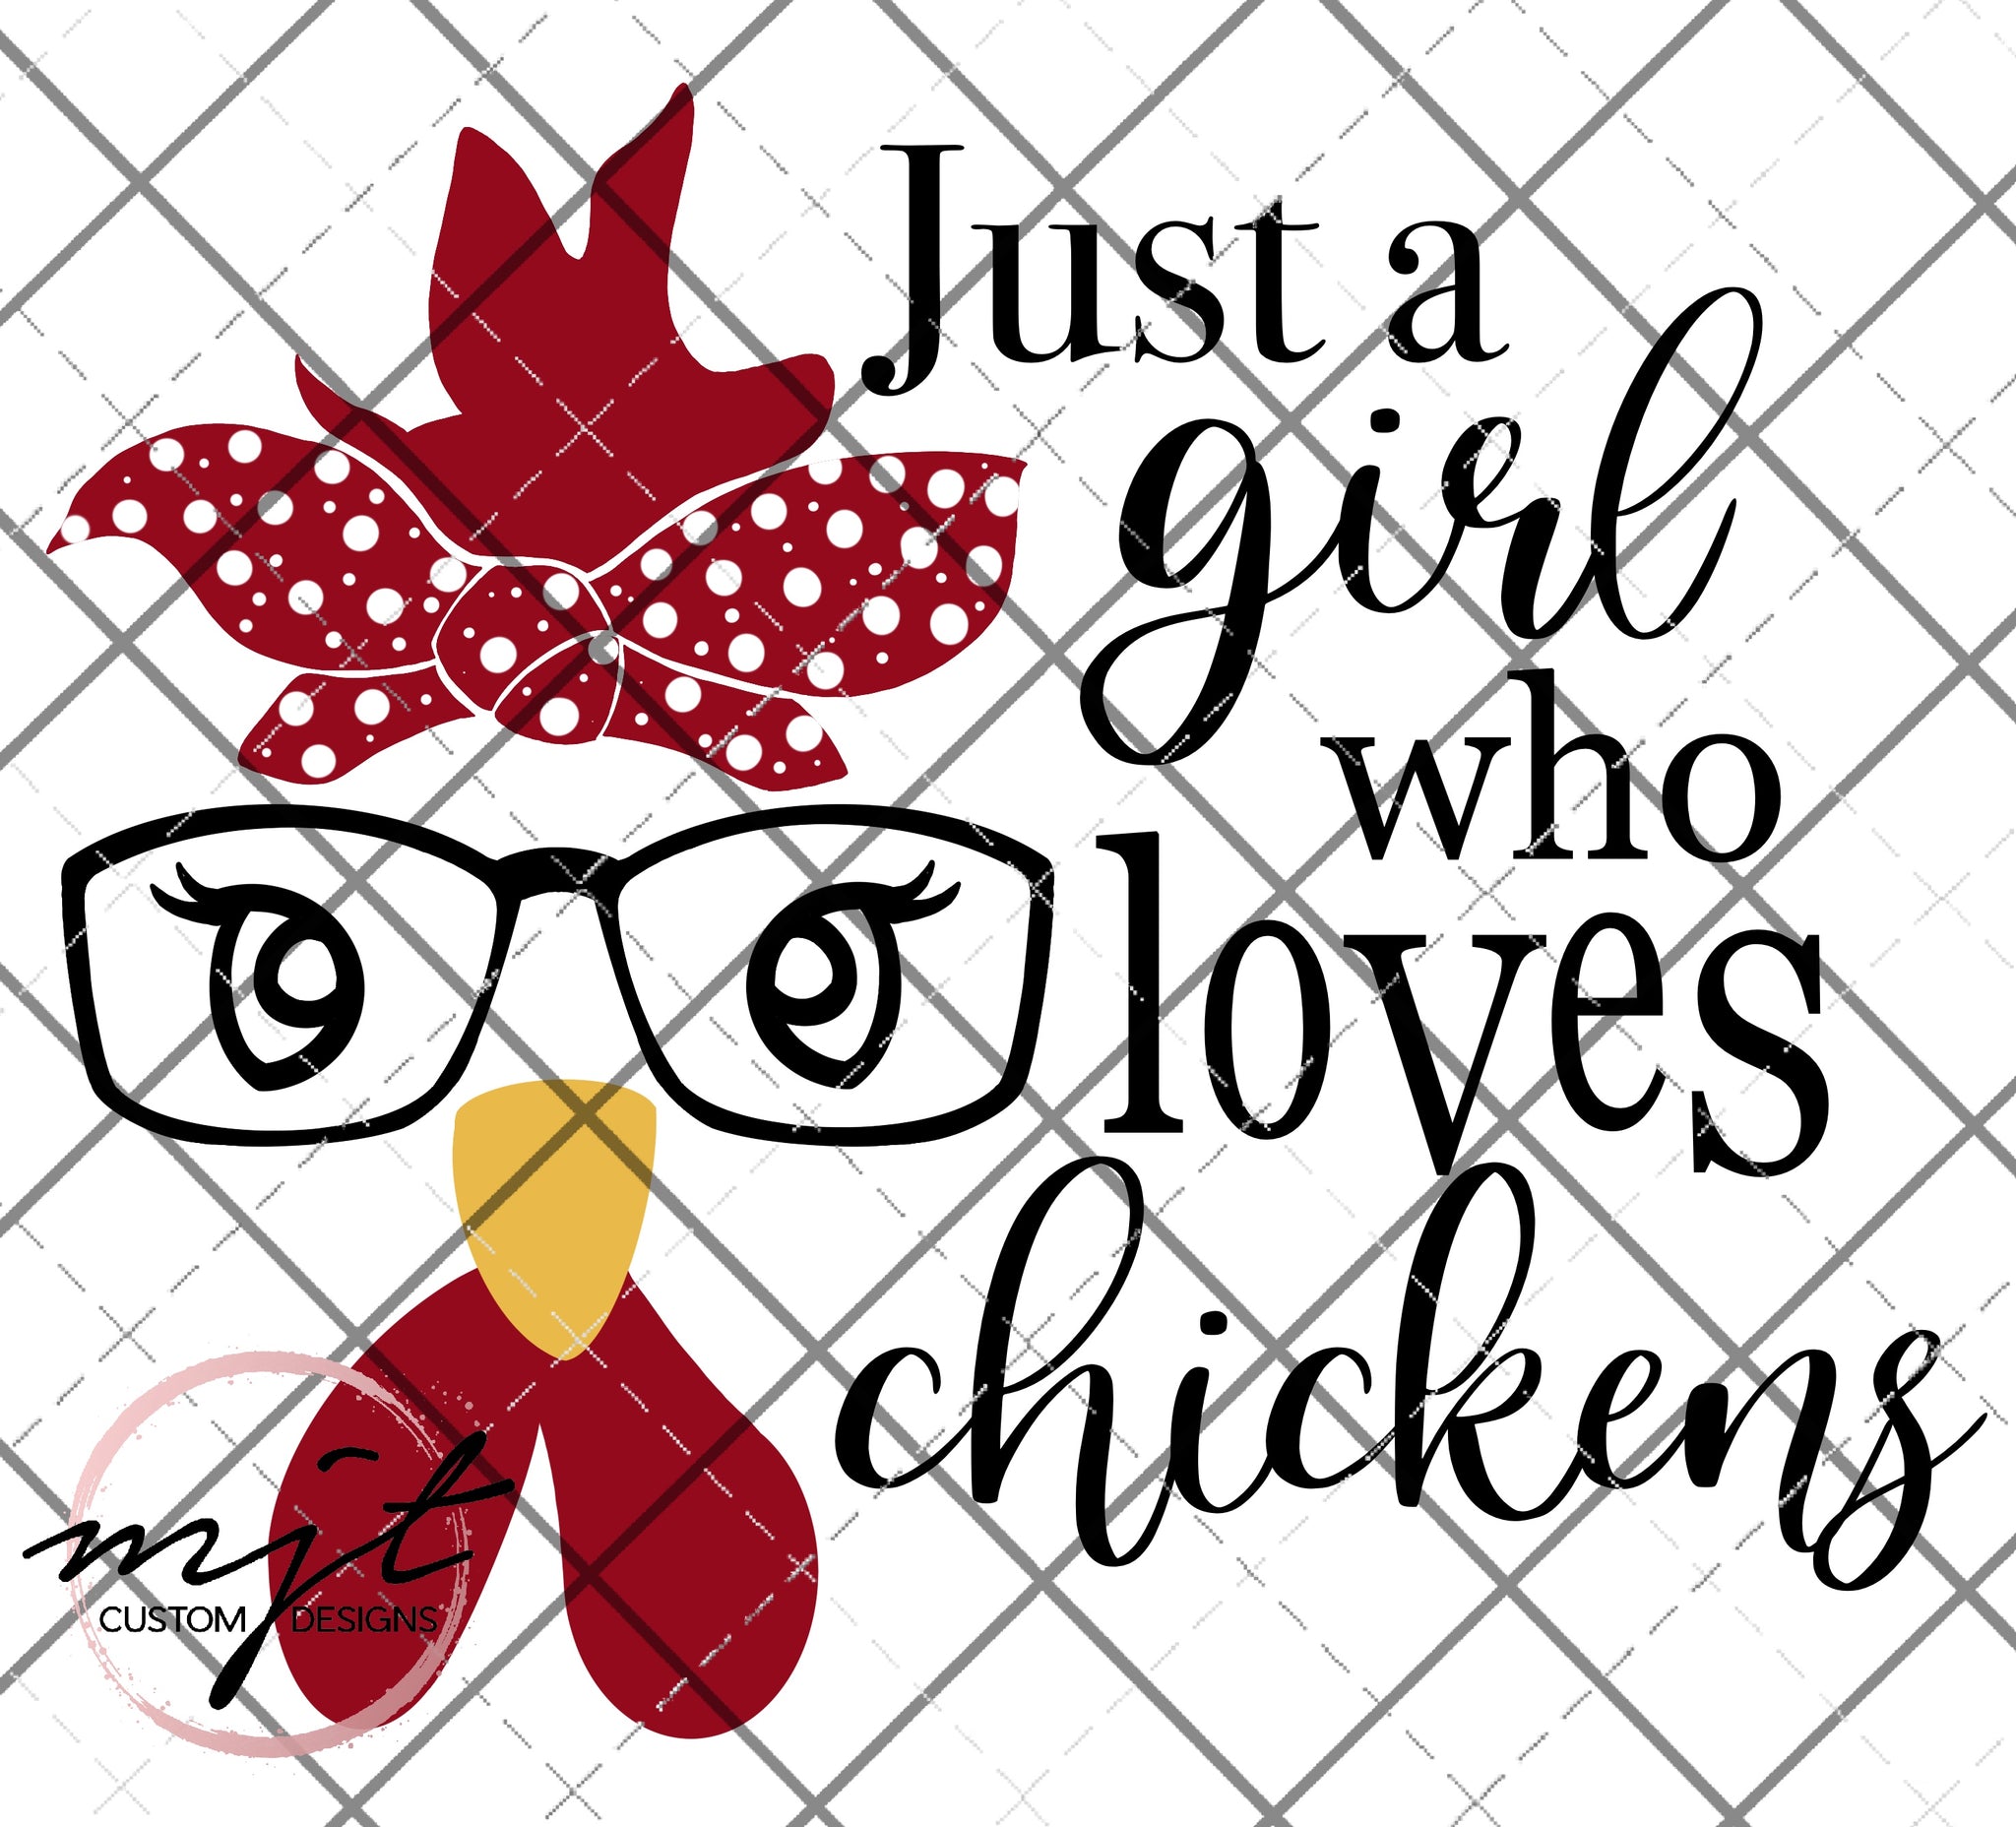 Just a girl who loves Chickens - PNG File